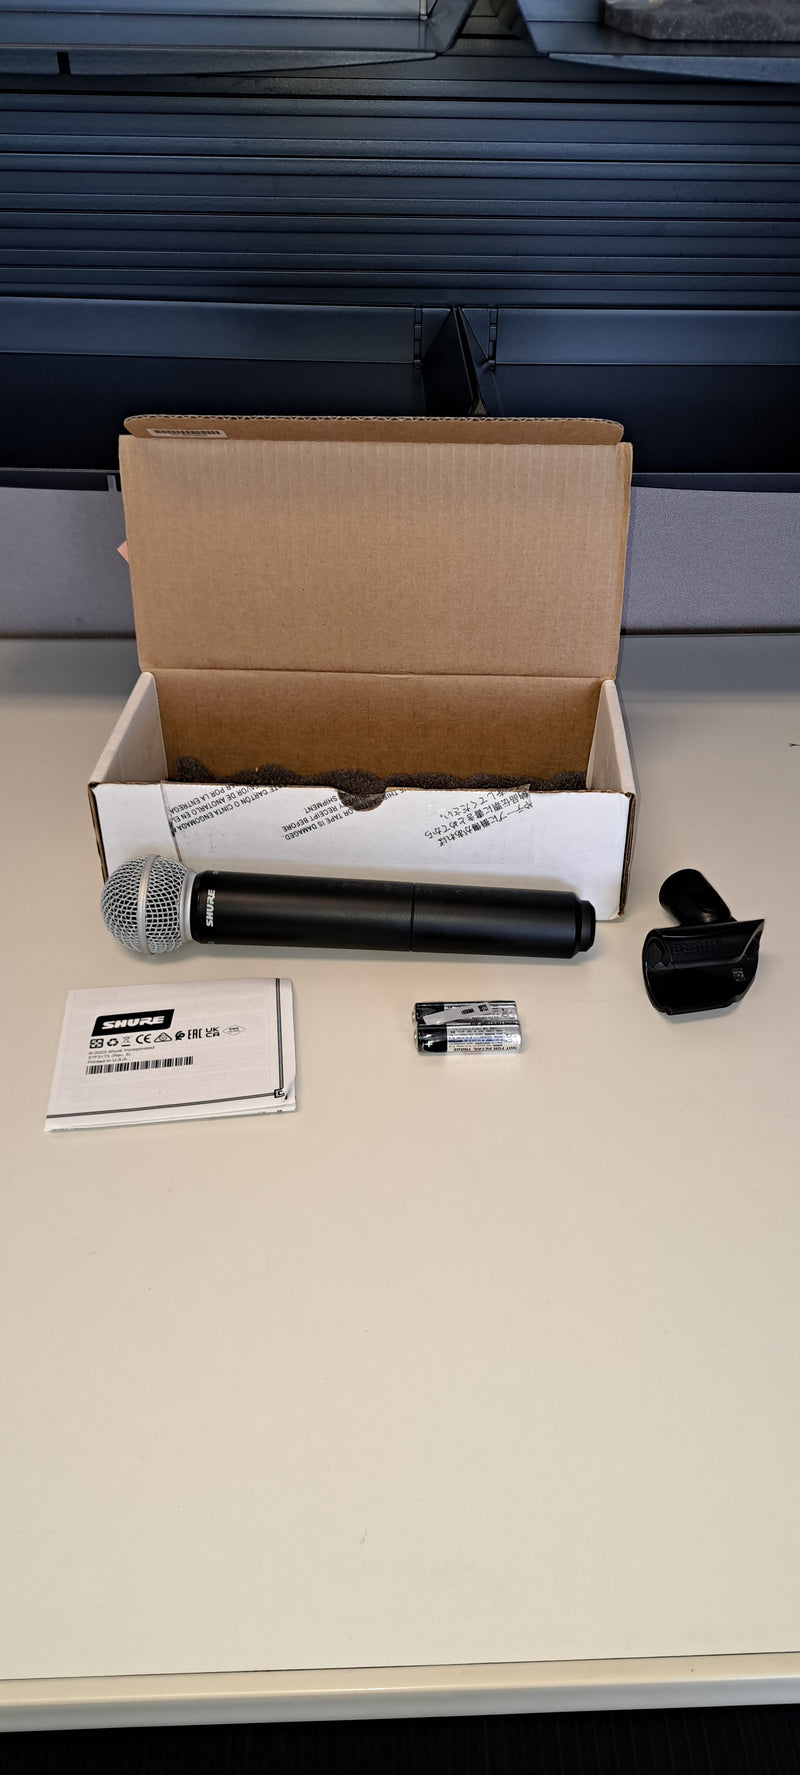 Shure BLX2/SM58 Handheld Wireless Microphone Transmitter with SM58 Capsule (USED)